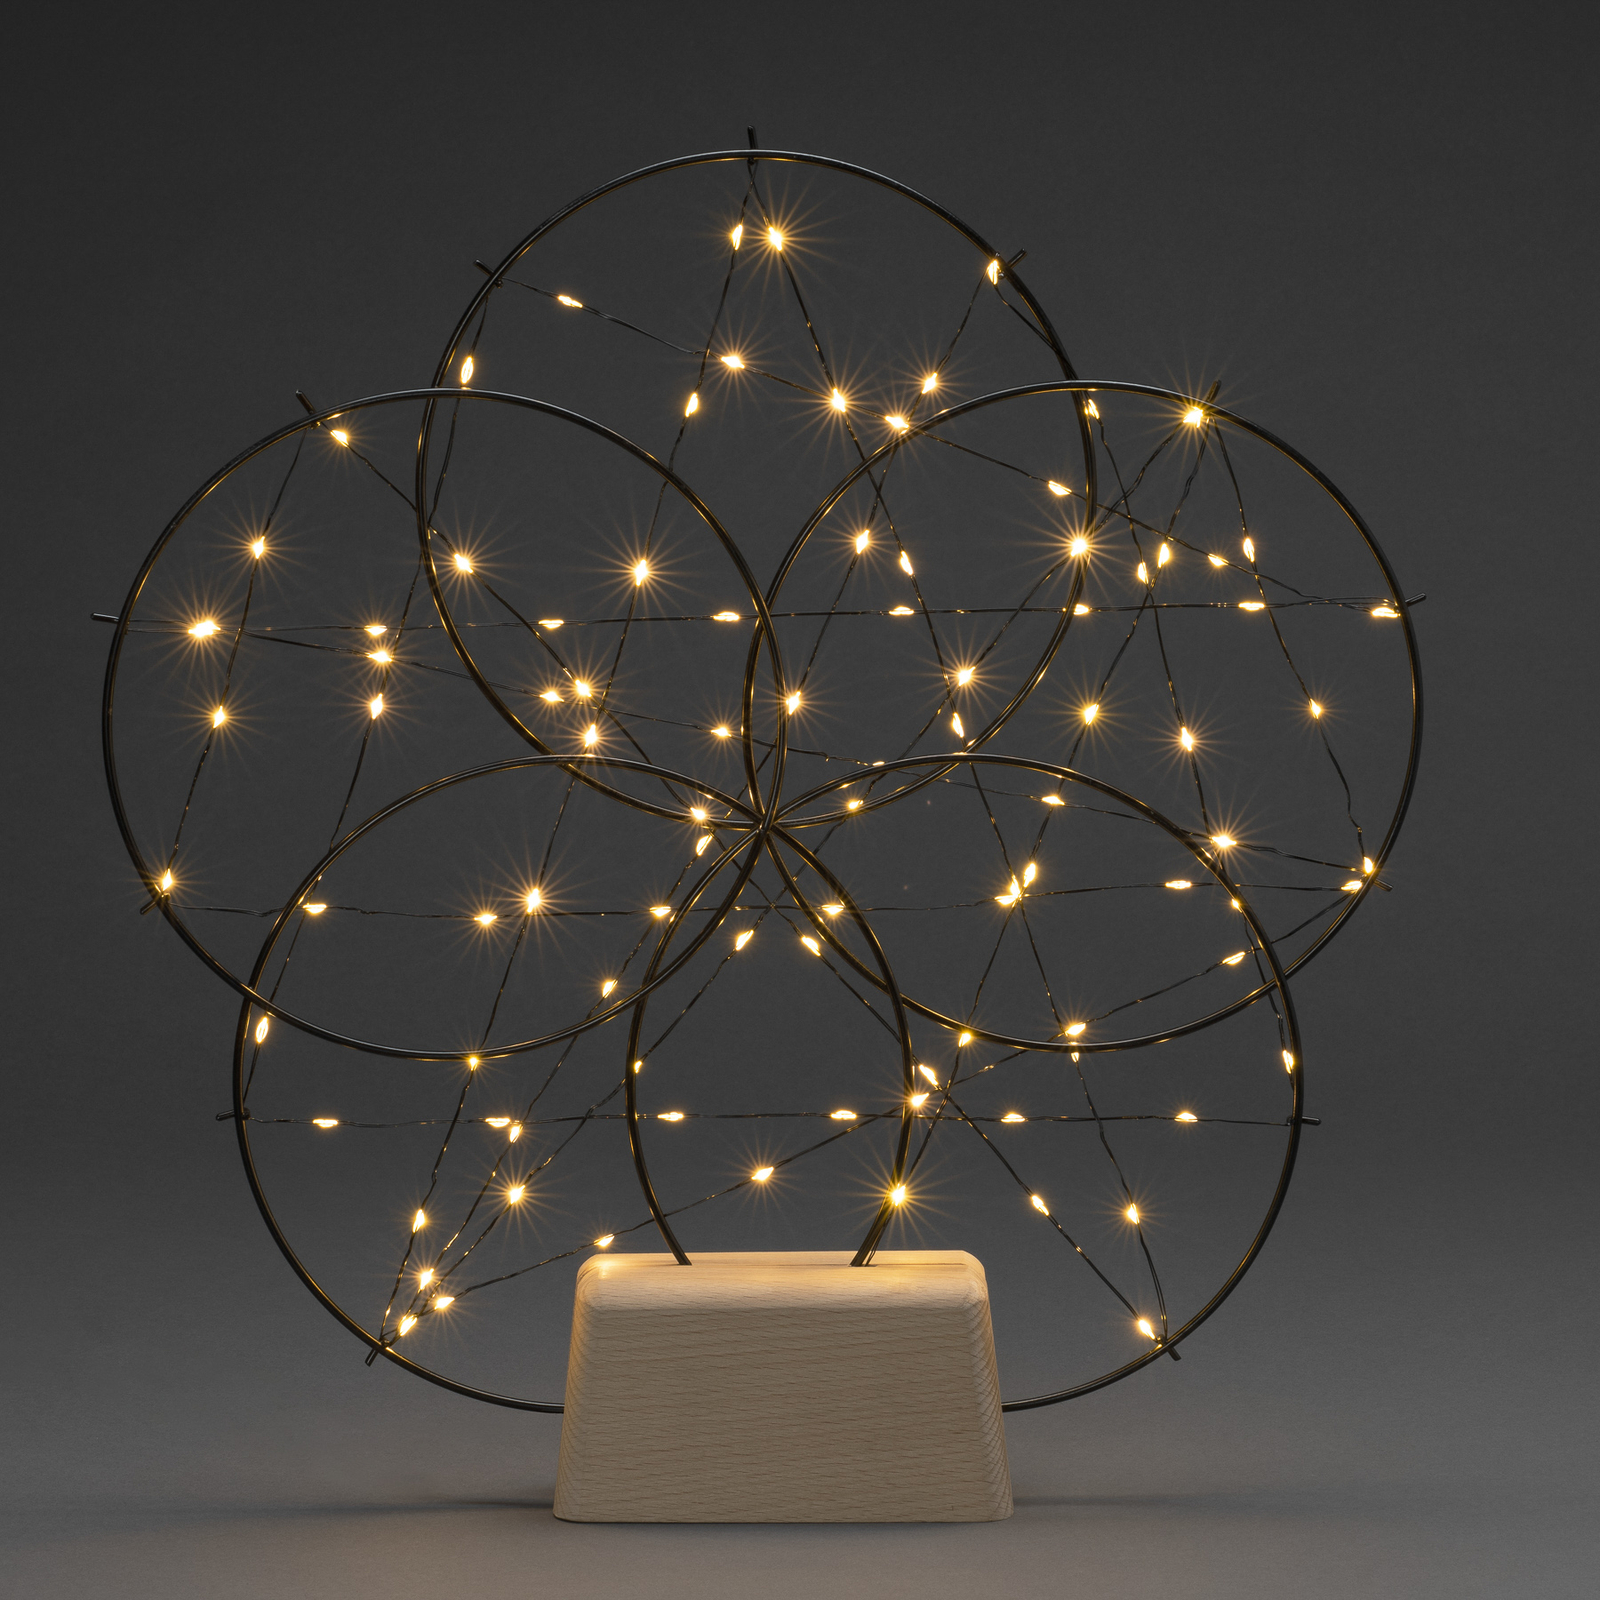 LED decorative light 5 small rings, wooden base